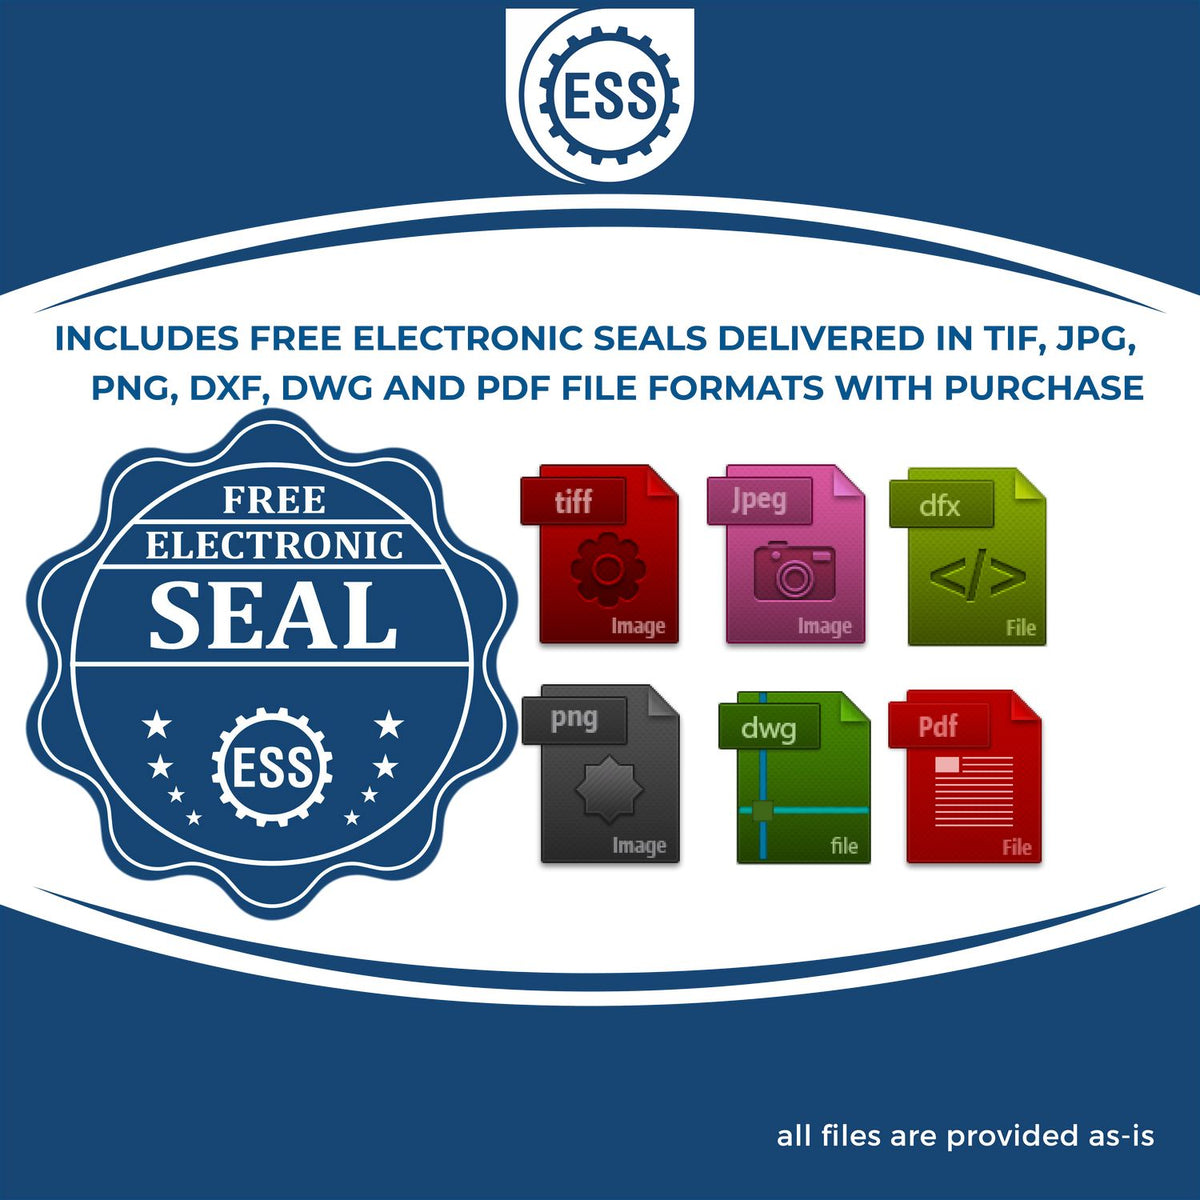 An infographic for the free electronic seal for the State of Virginia Soft Land Surveyor Embossing Seal illustrating the different file type icons such as DXF, DWG, TIF, JPG and PNG.